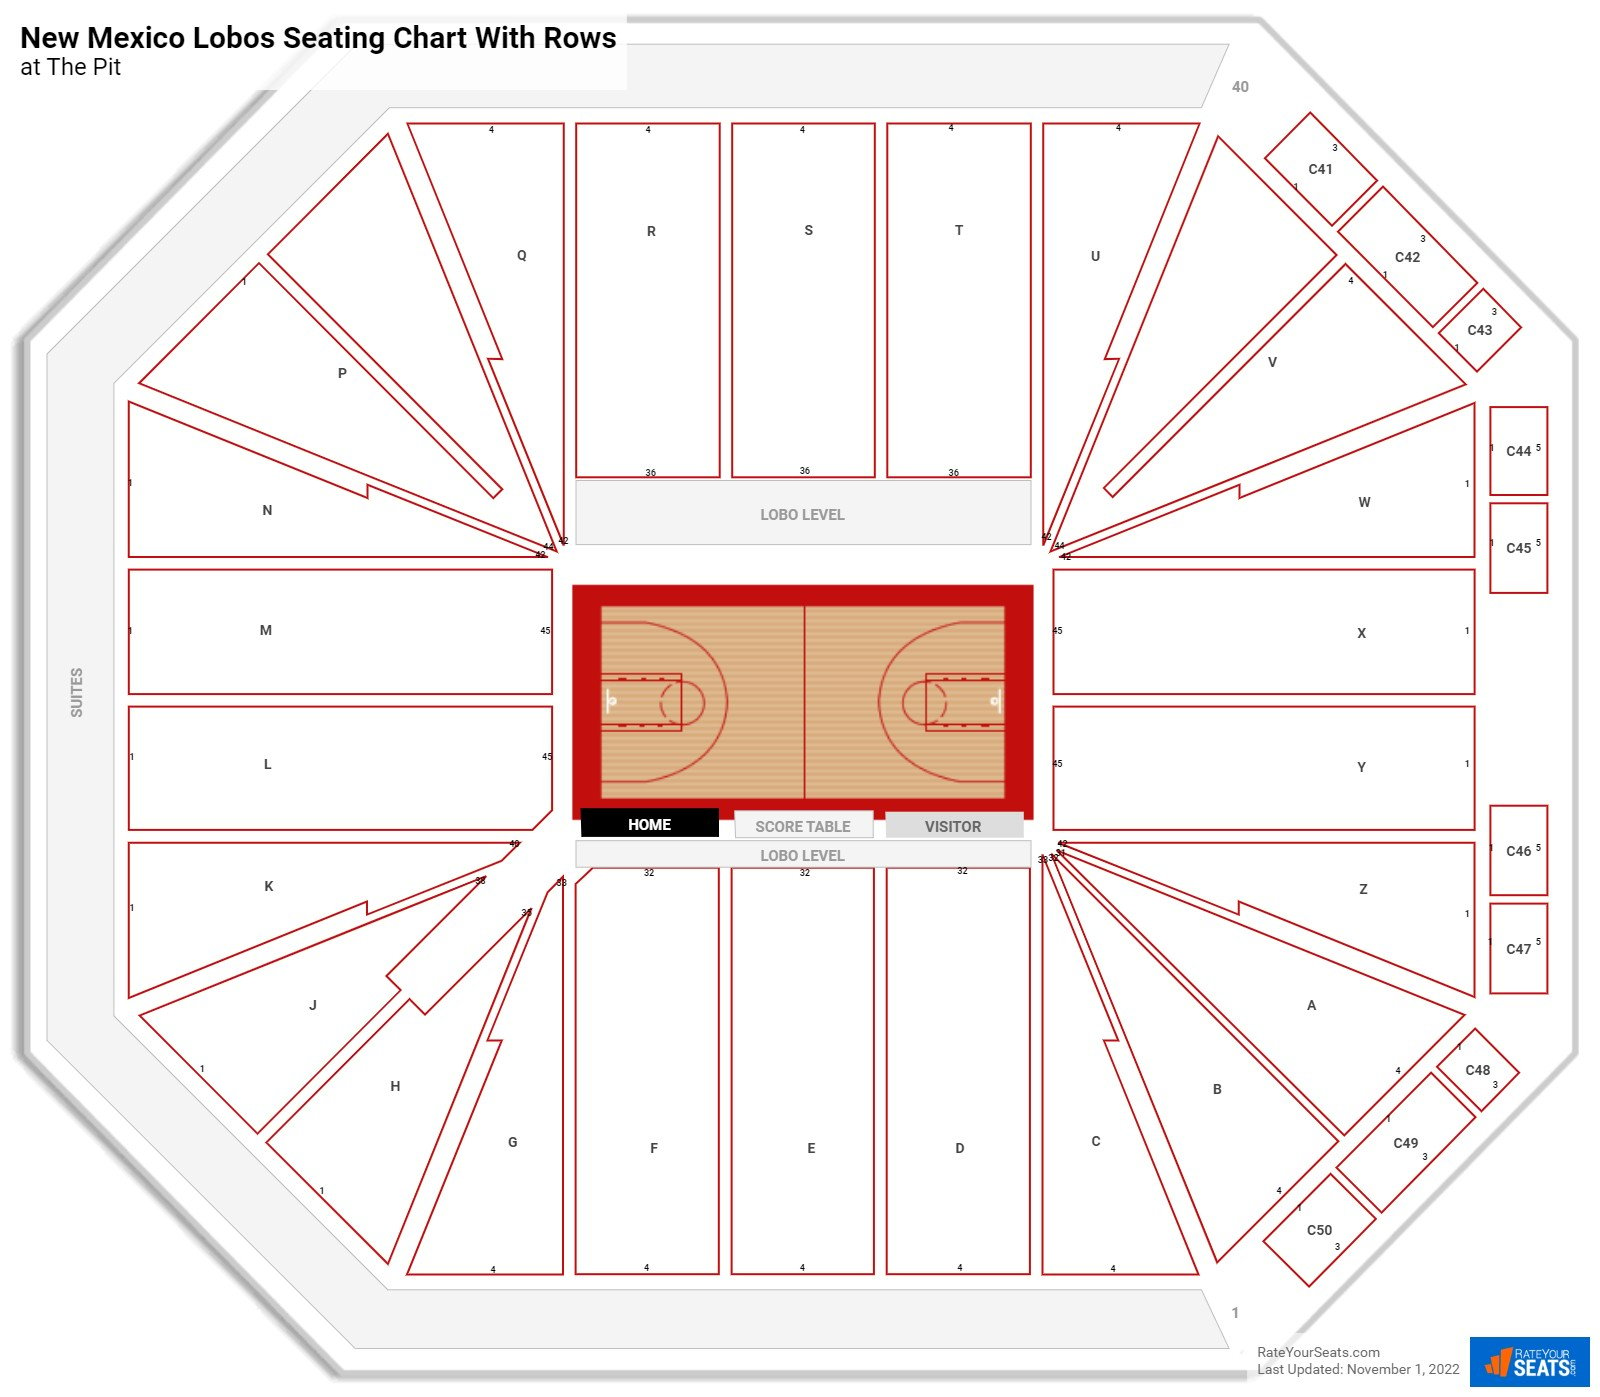 The Pit seating chart with row numbers